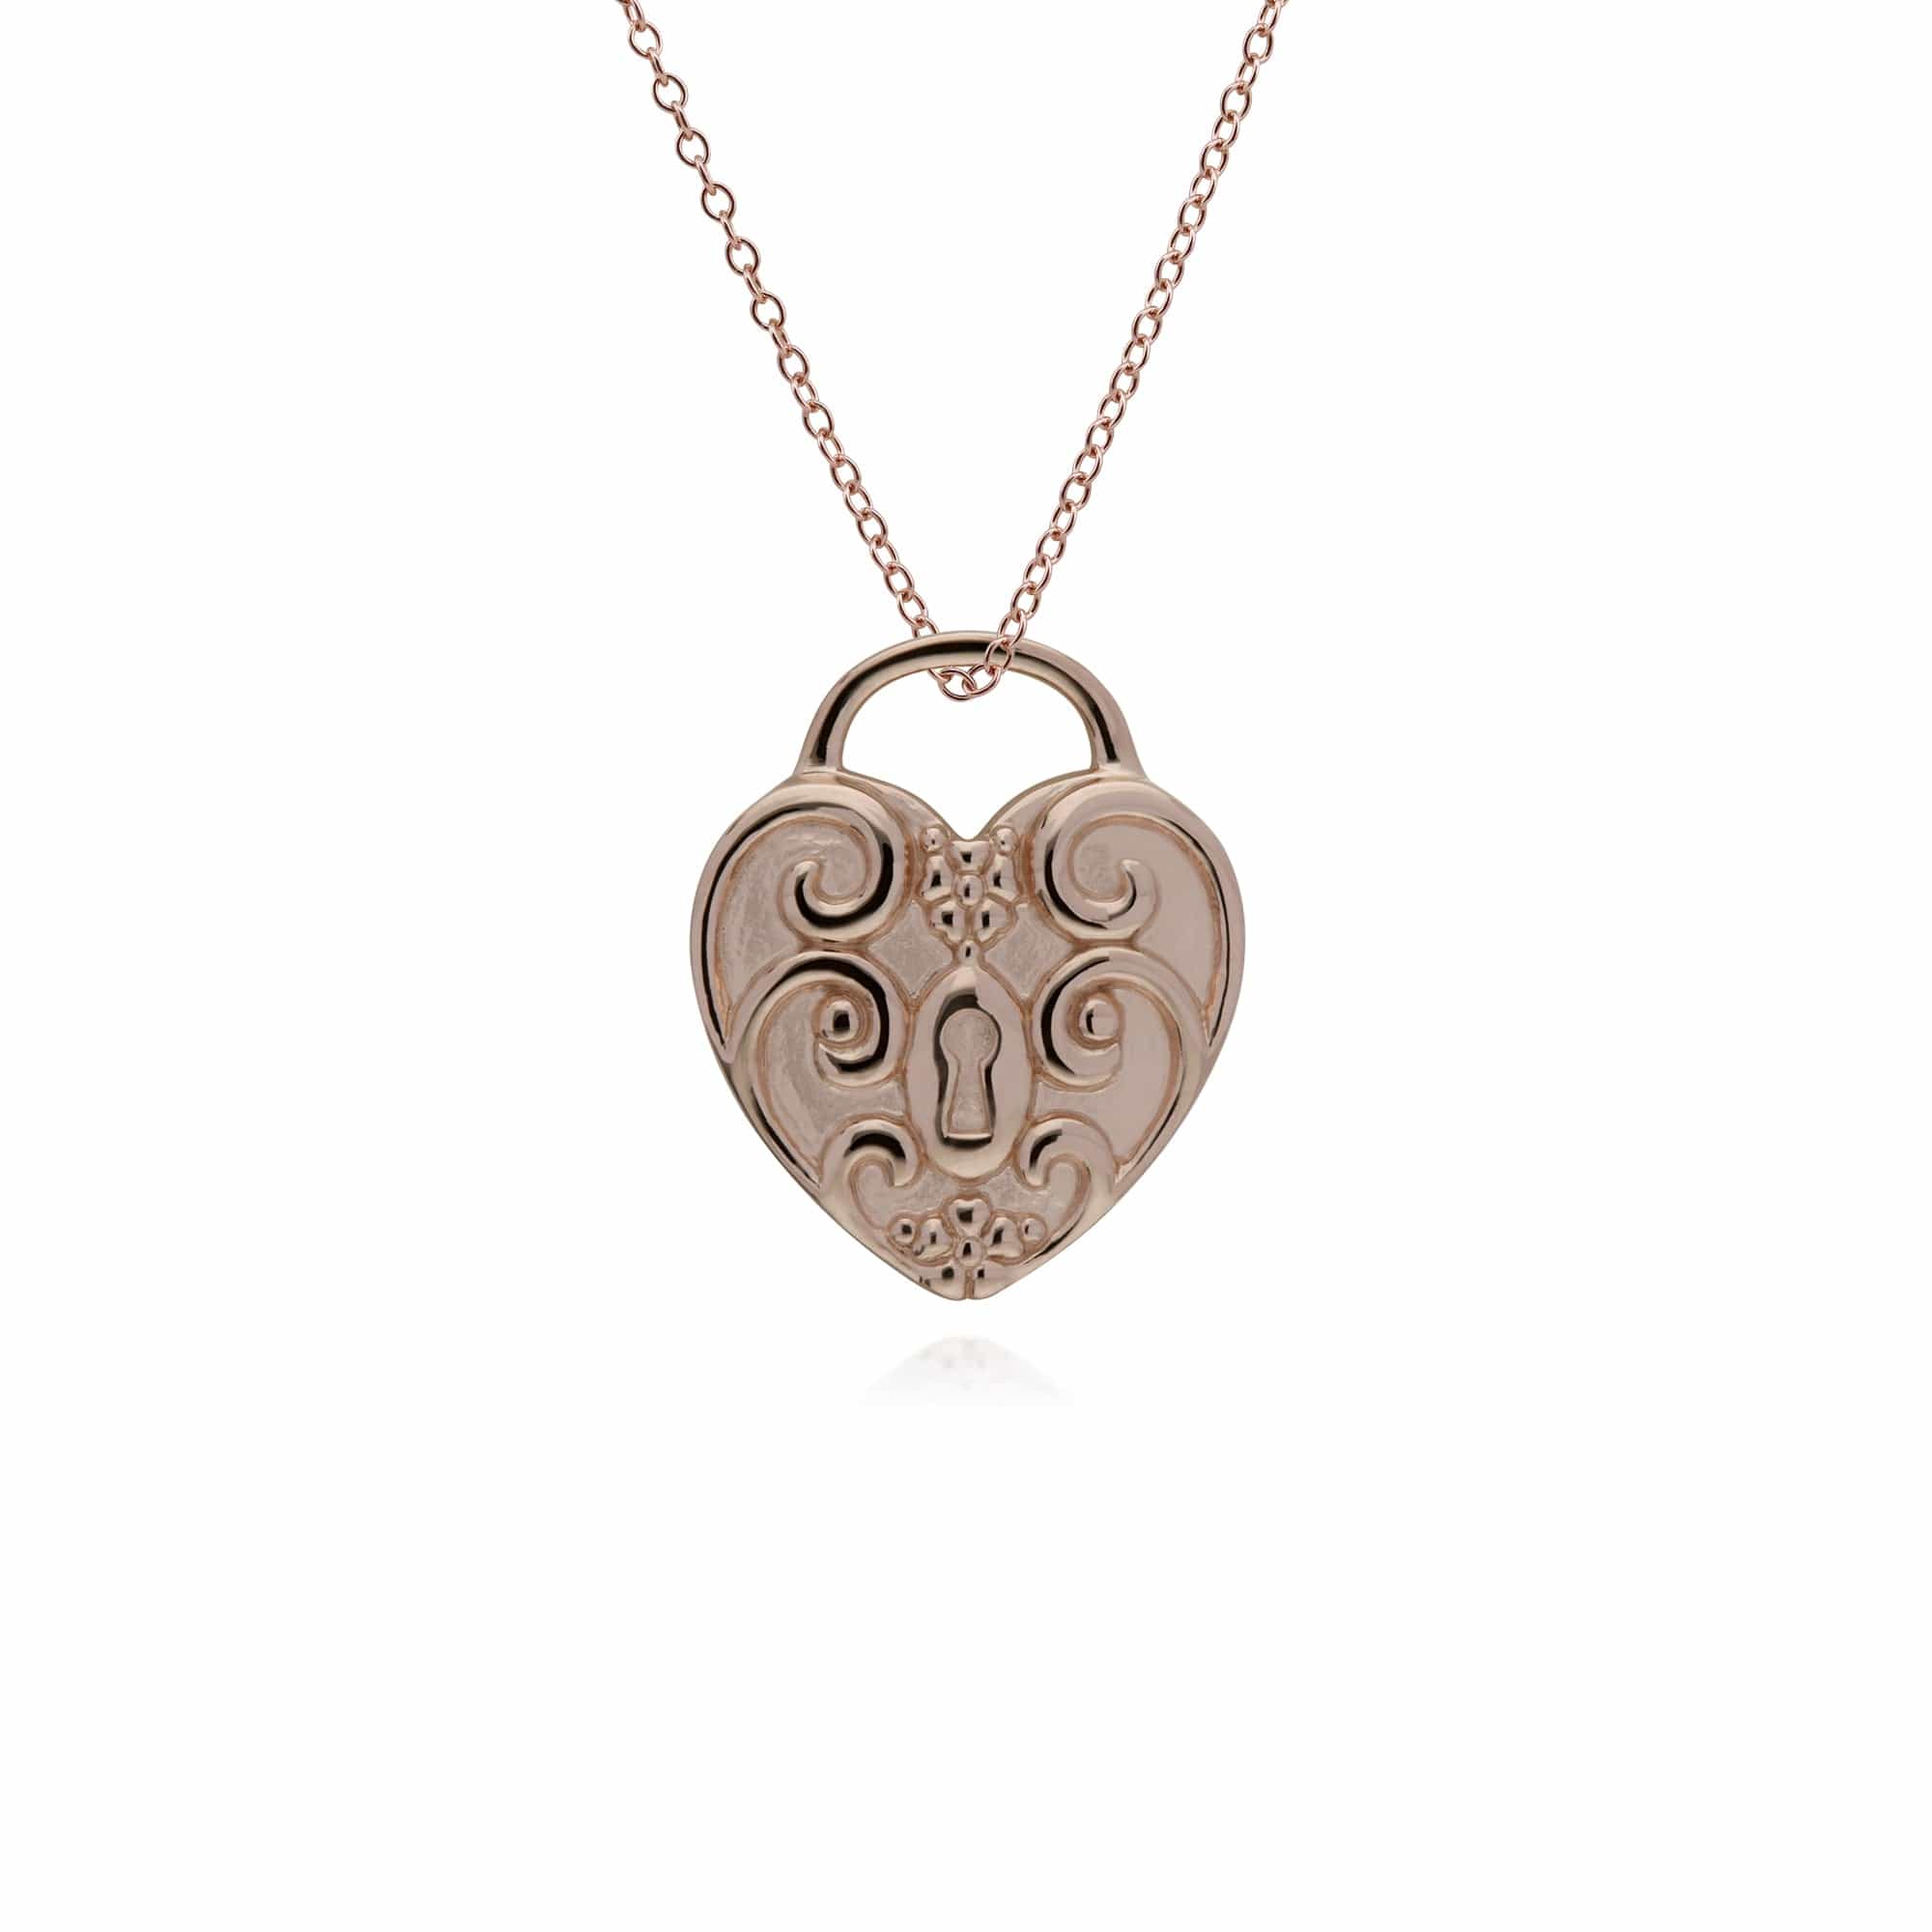 270P027402925-270P026501925 Classic Swirl Heart Lock Pendant & Turquoise Key Charm in Rose Gold Plated 925 Sterling Silver 3